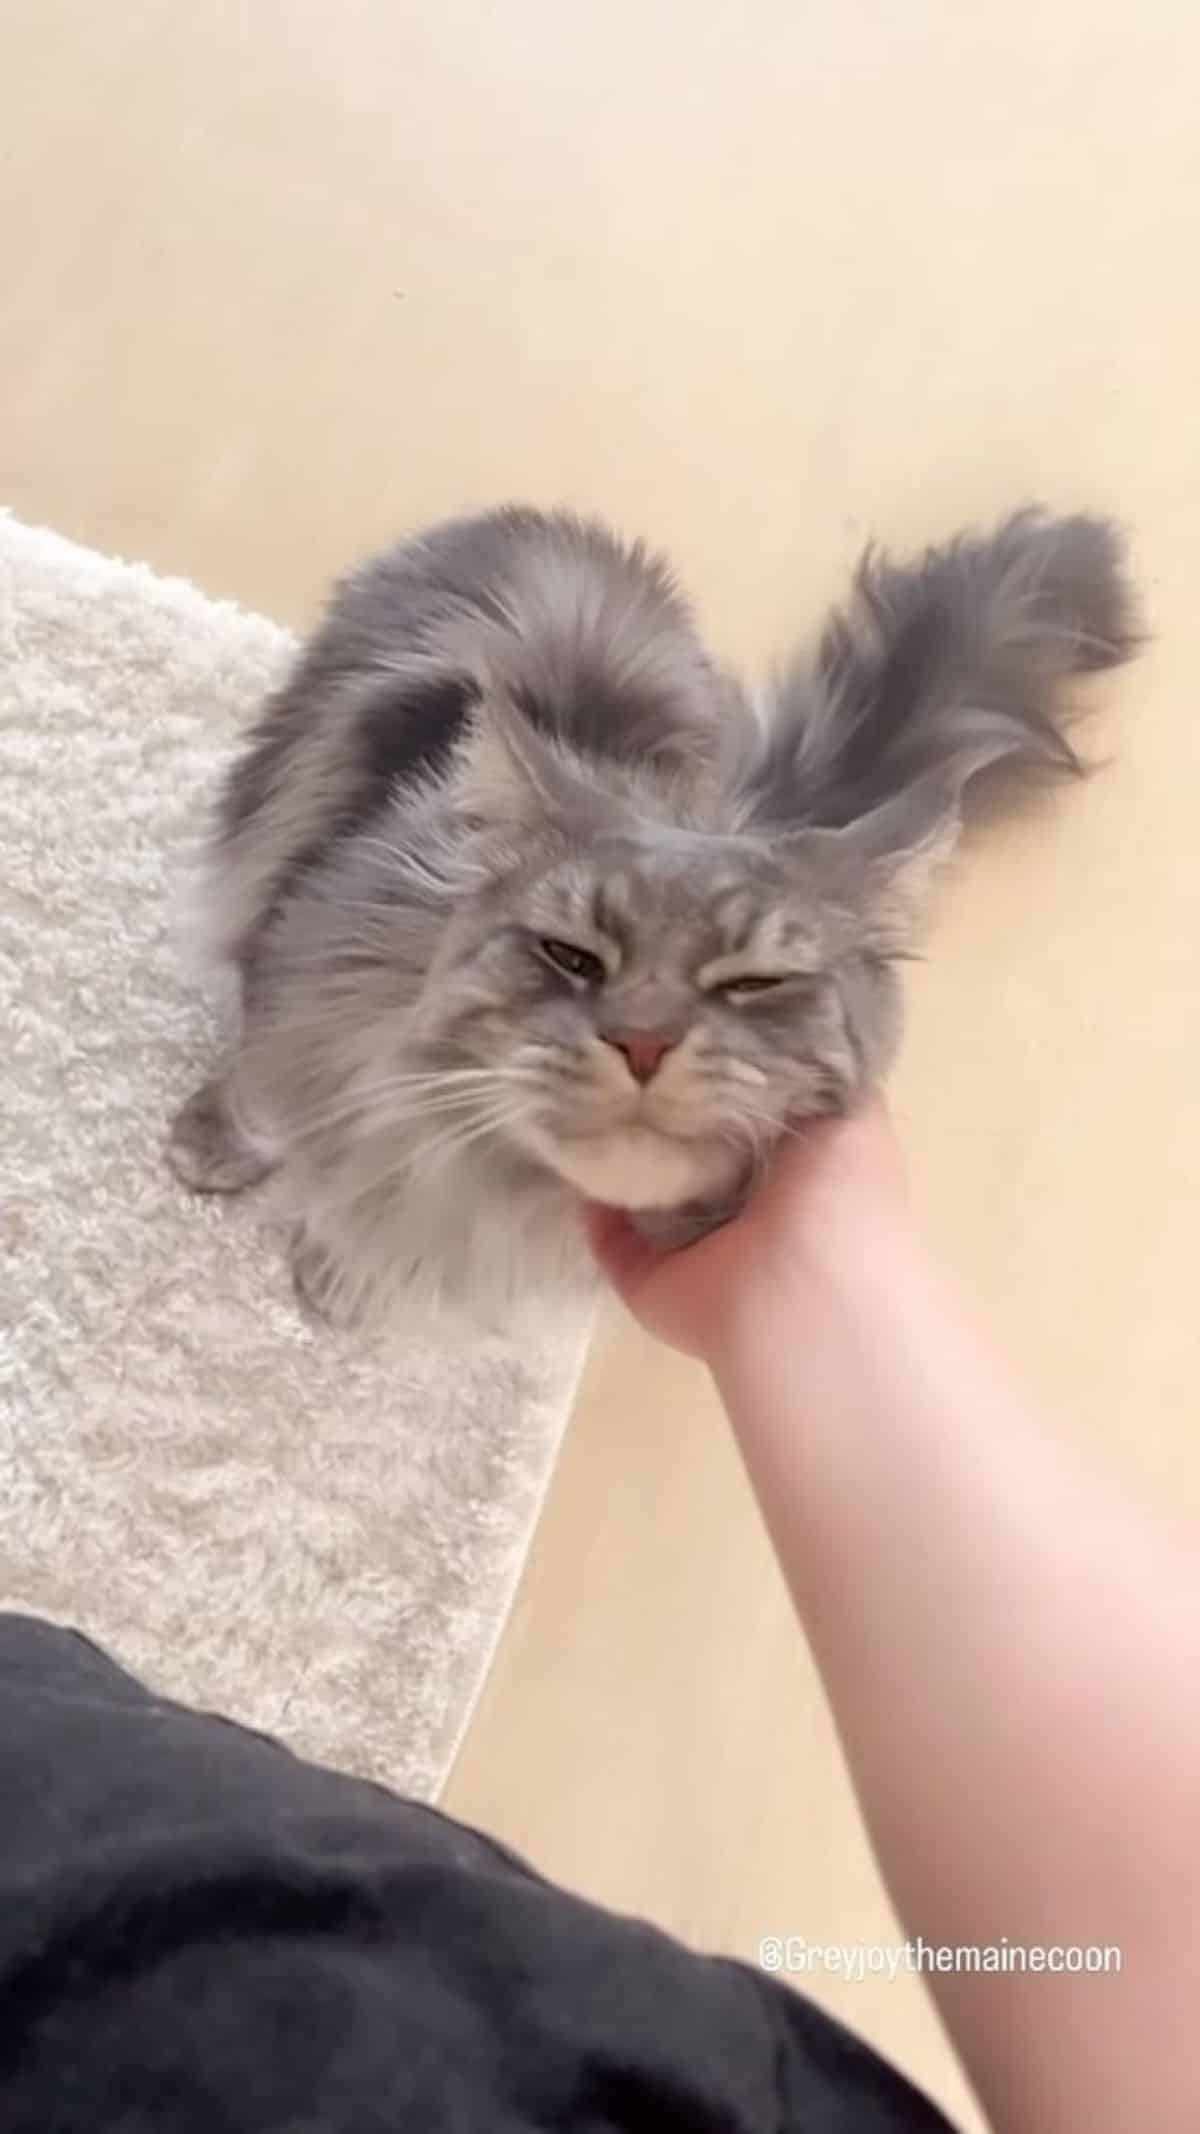 A human scratching a fluffy gray maine coon.